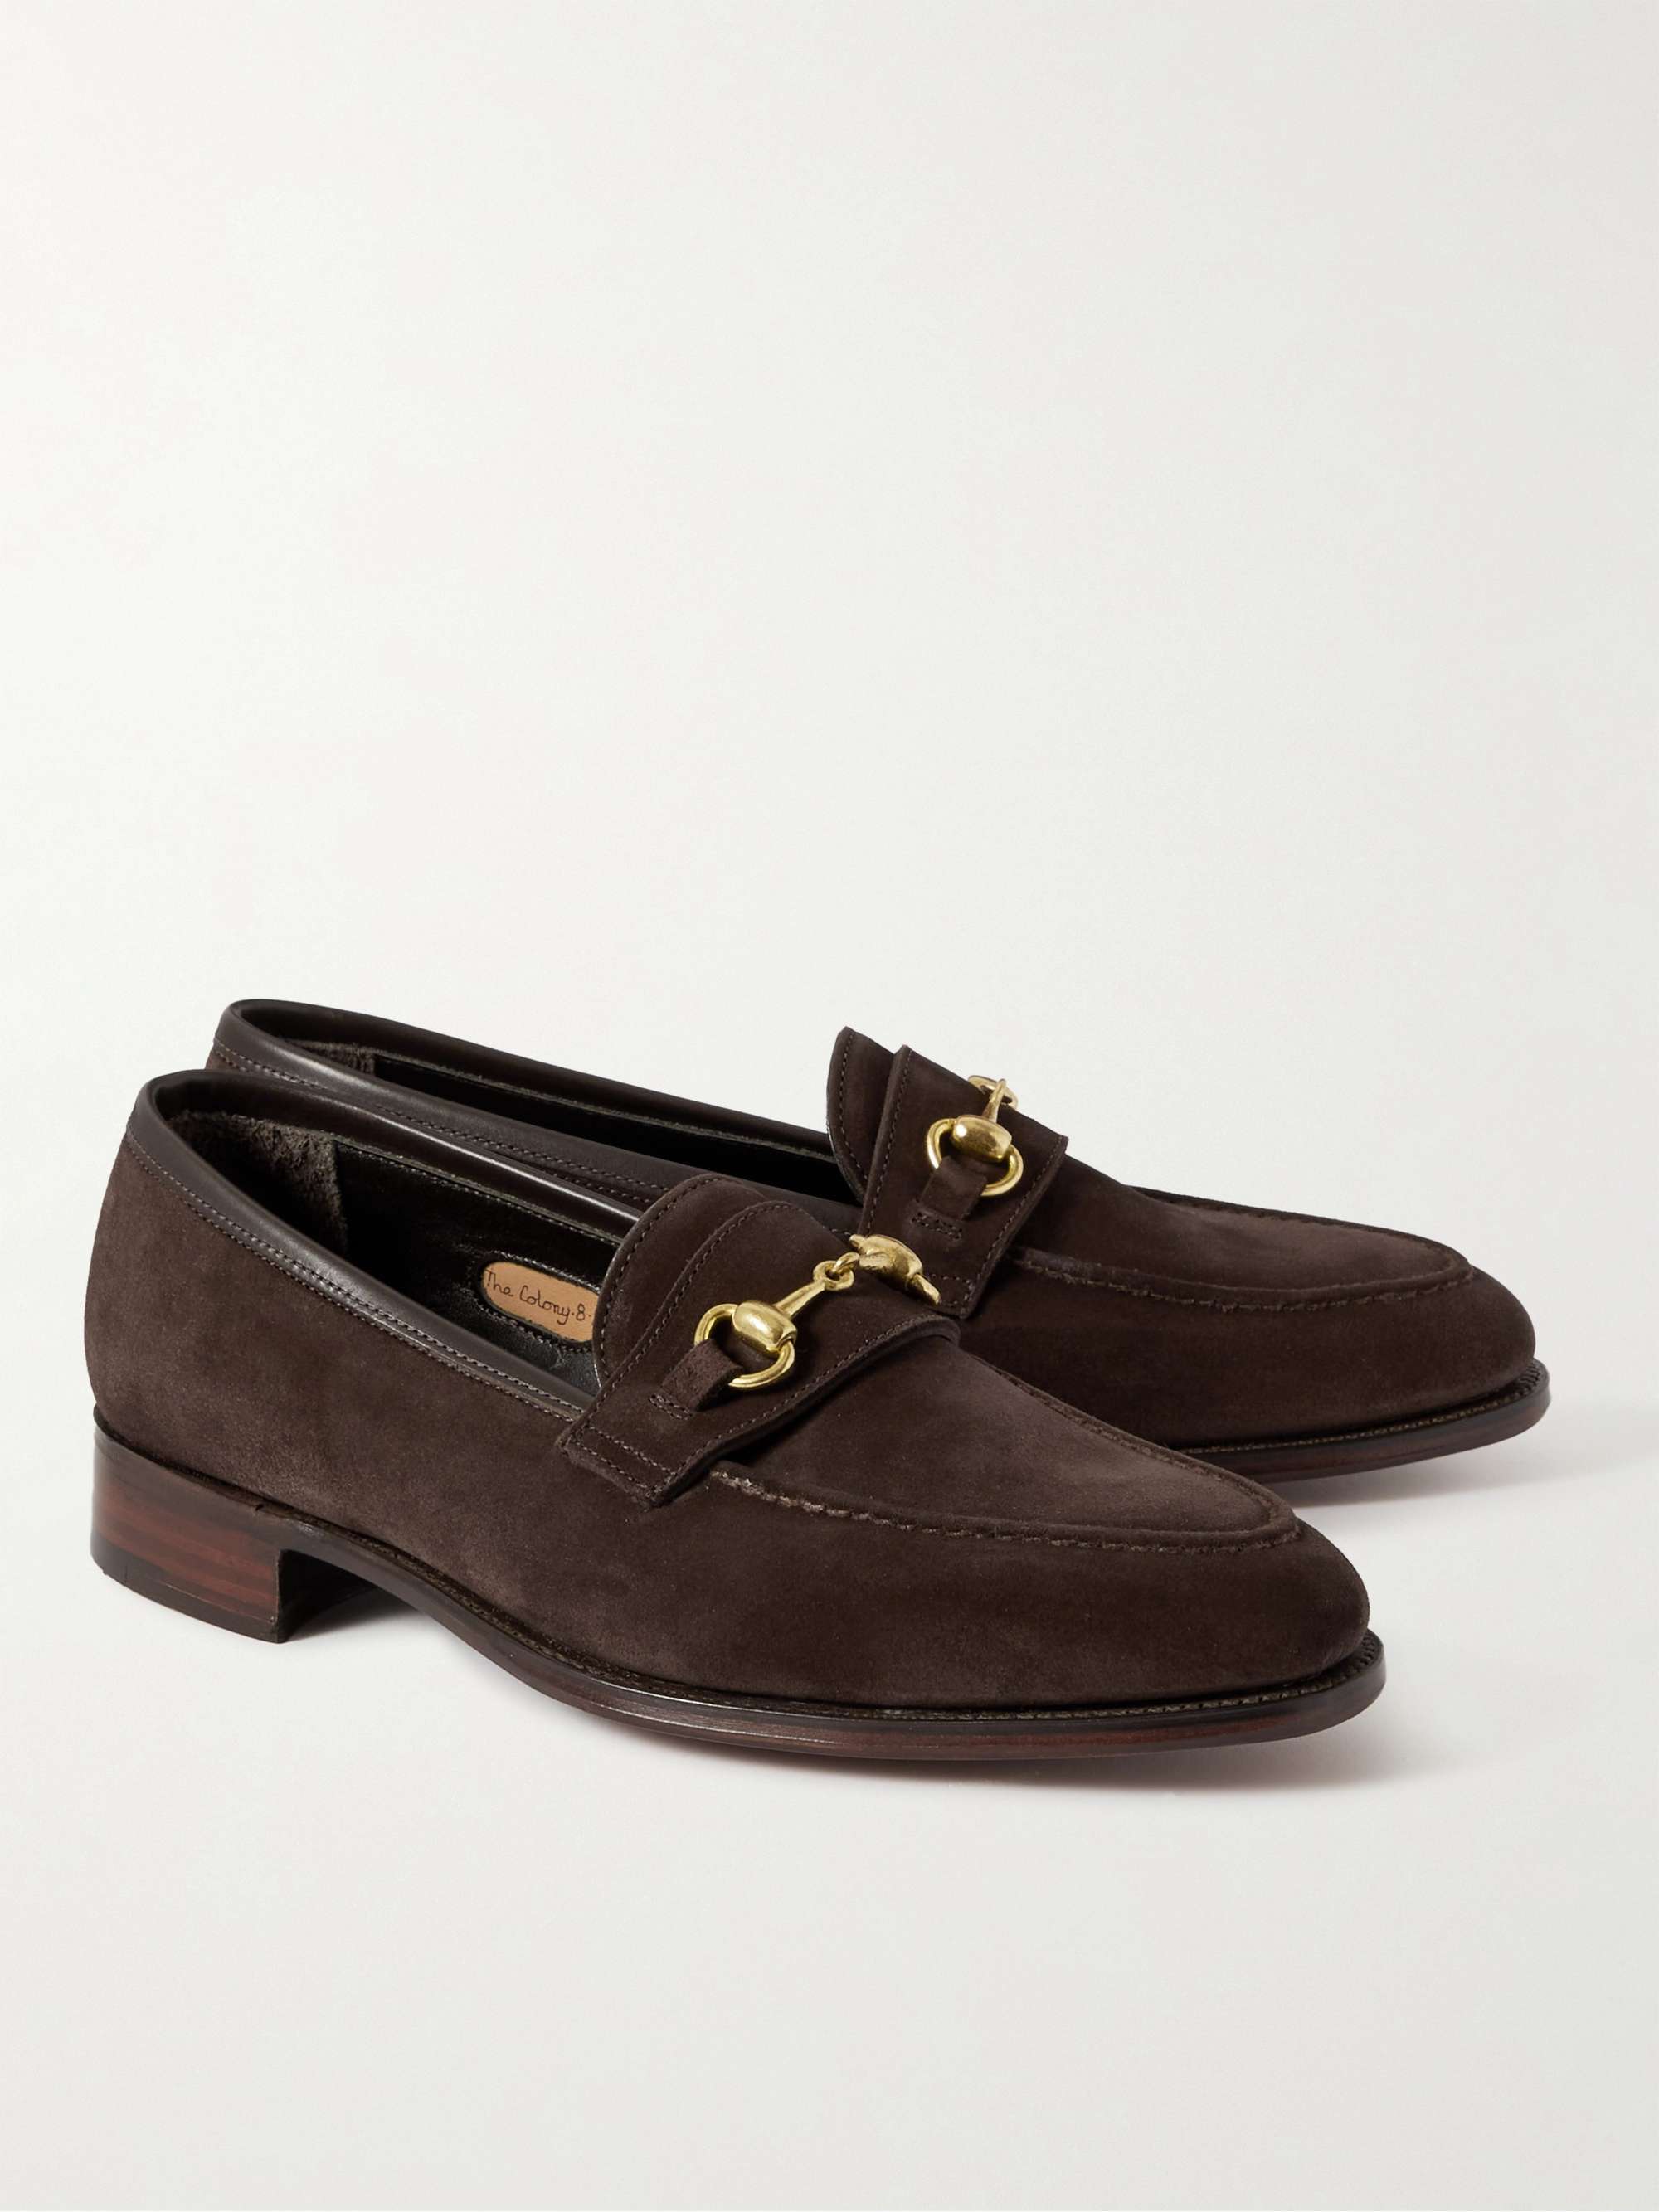 GEORGE CLEVERLEY Colony Horsebit Suede Loafers